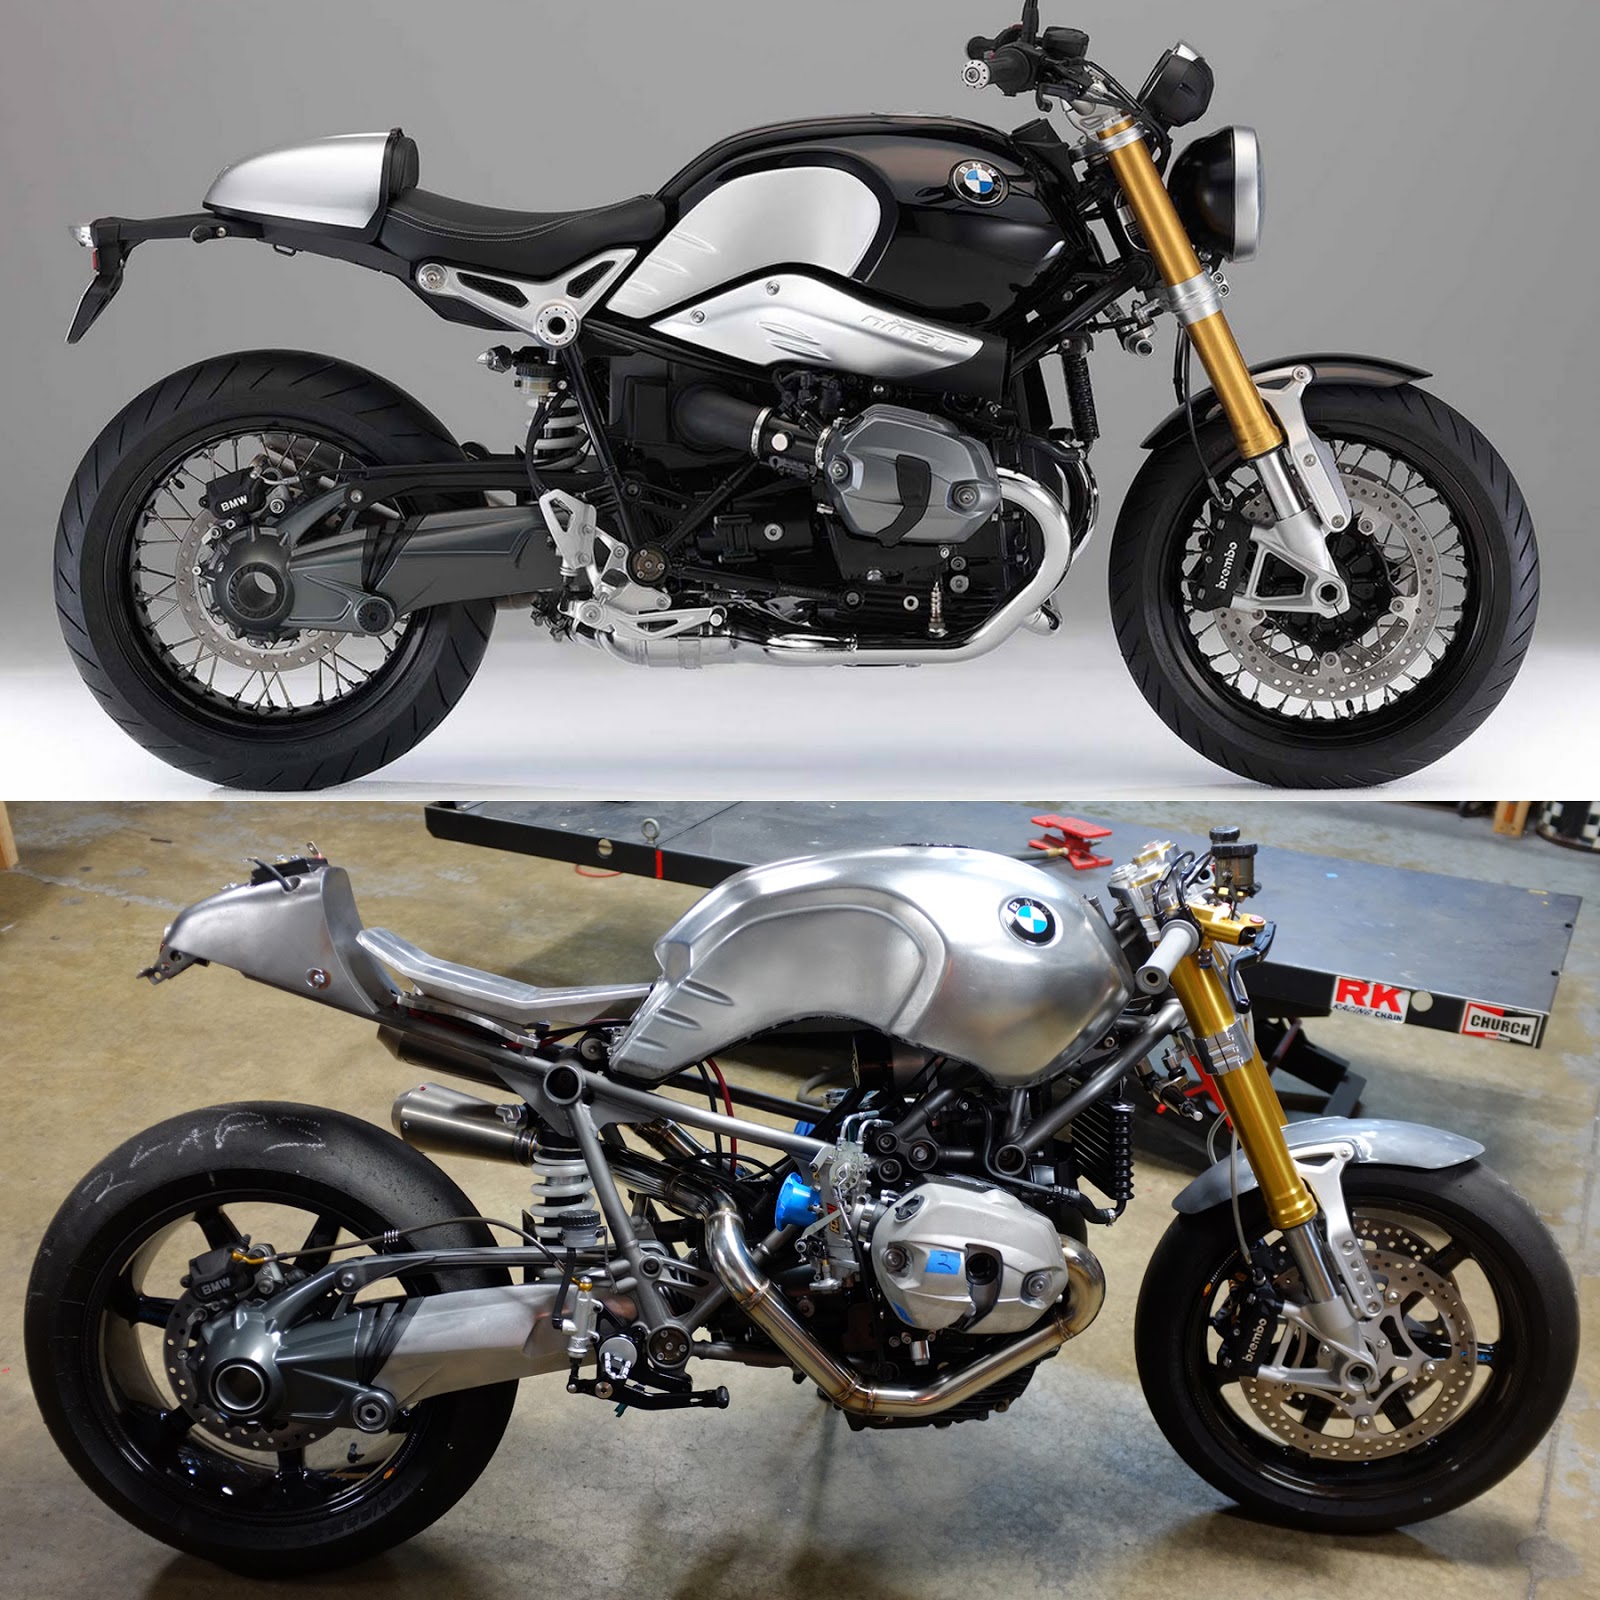 Church of Choppers: Church of Choppers BMW R9T / Before and afters